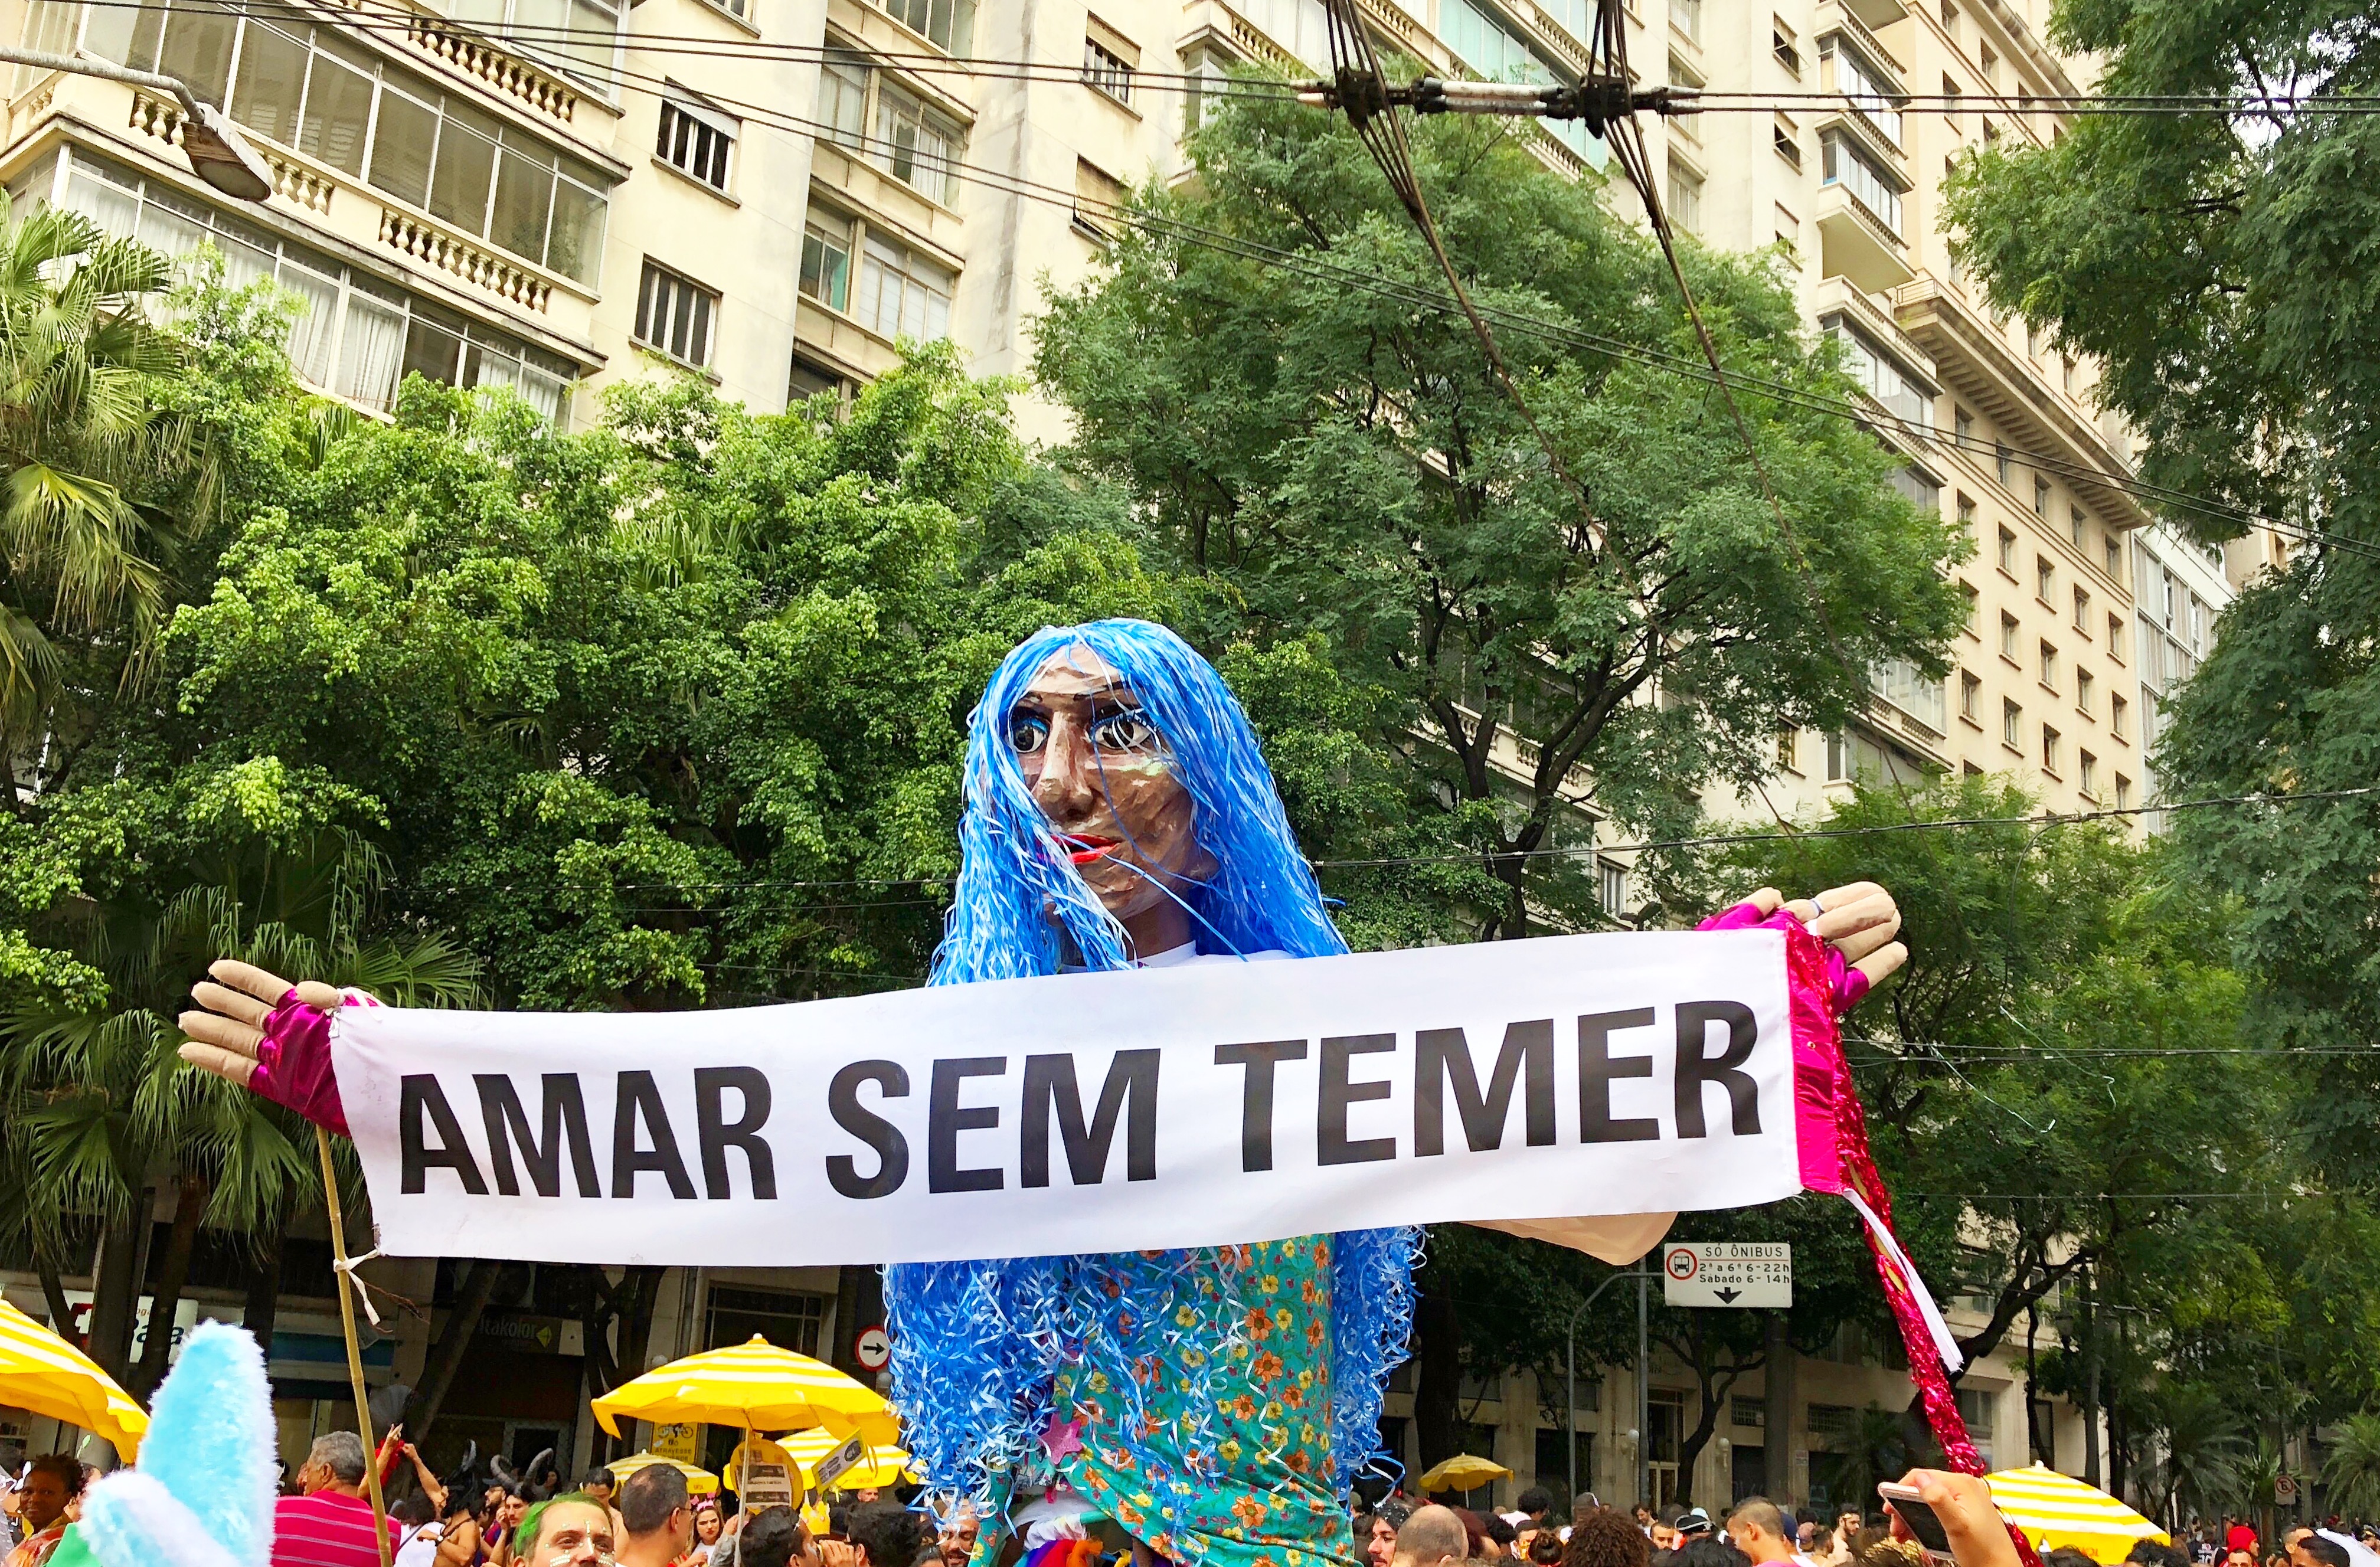 Amar Sem Temer is Love Without Fear